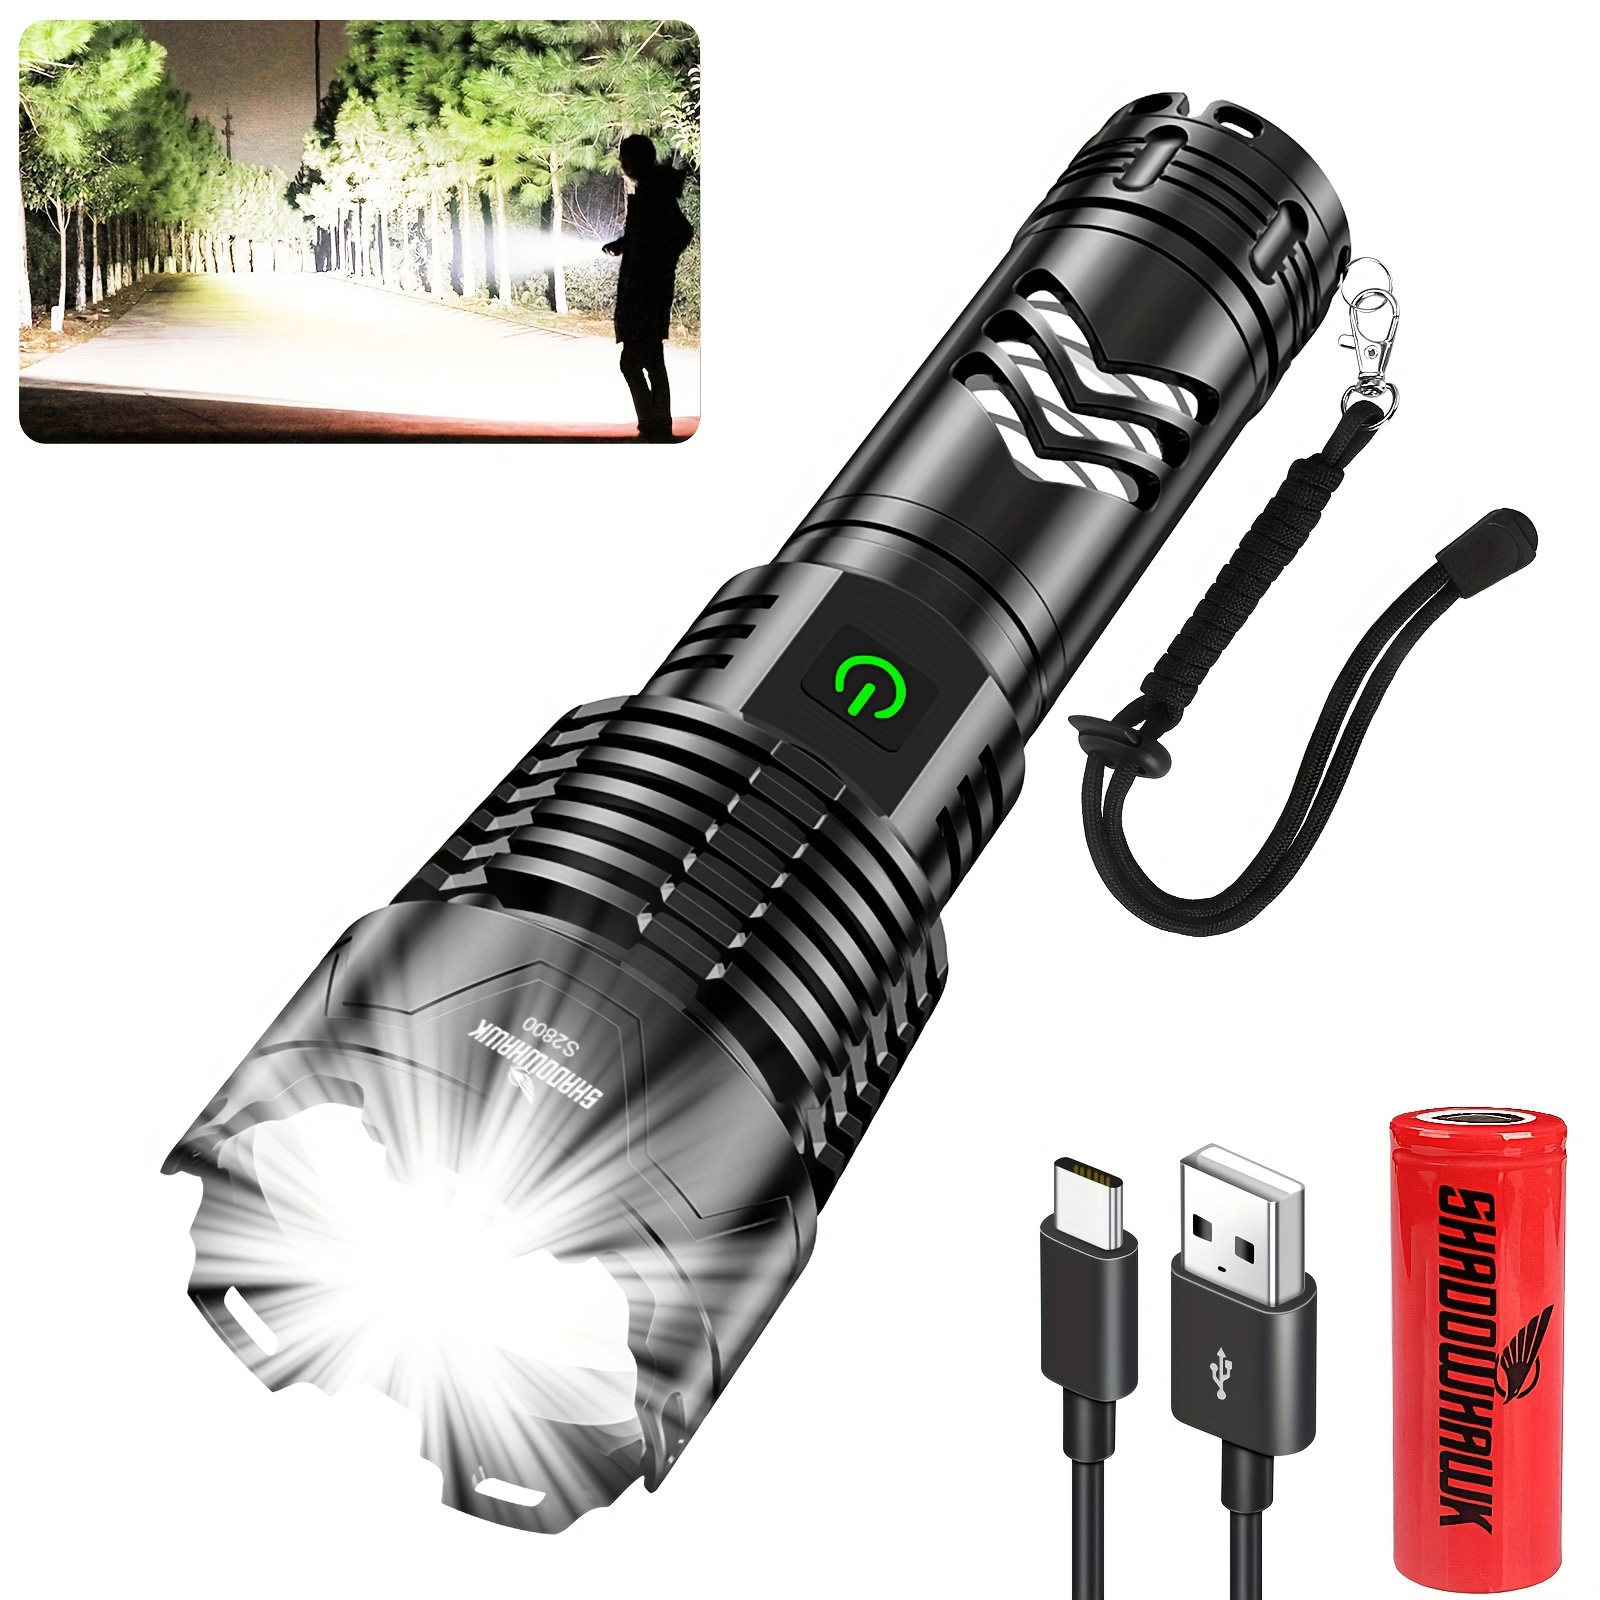 

Shadowhawk Led Flashlight Extremely Bright, Xhp160.250000 Lumen Flashlight Led Rechargeable Usb Tactical Flashlights Battery Powered, Flashlight For Outdoor Camping(with Battery)